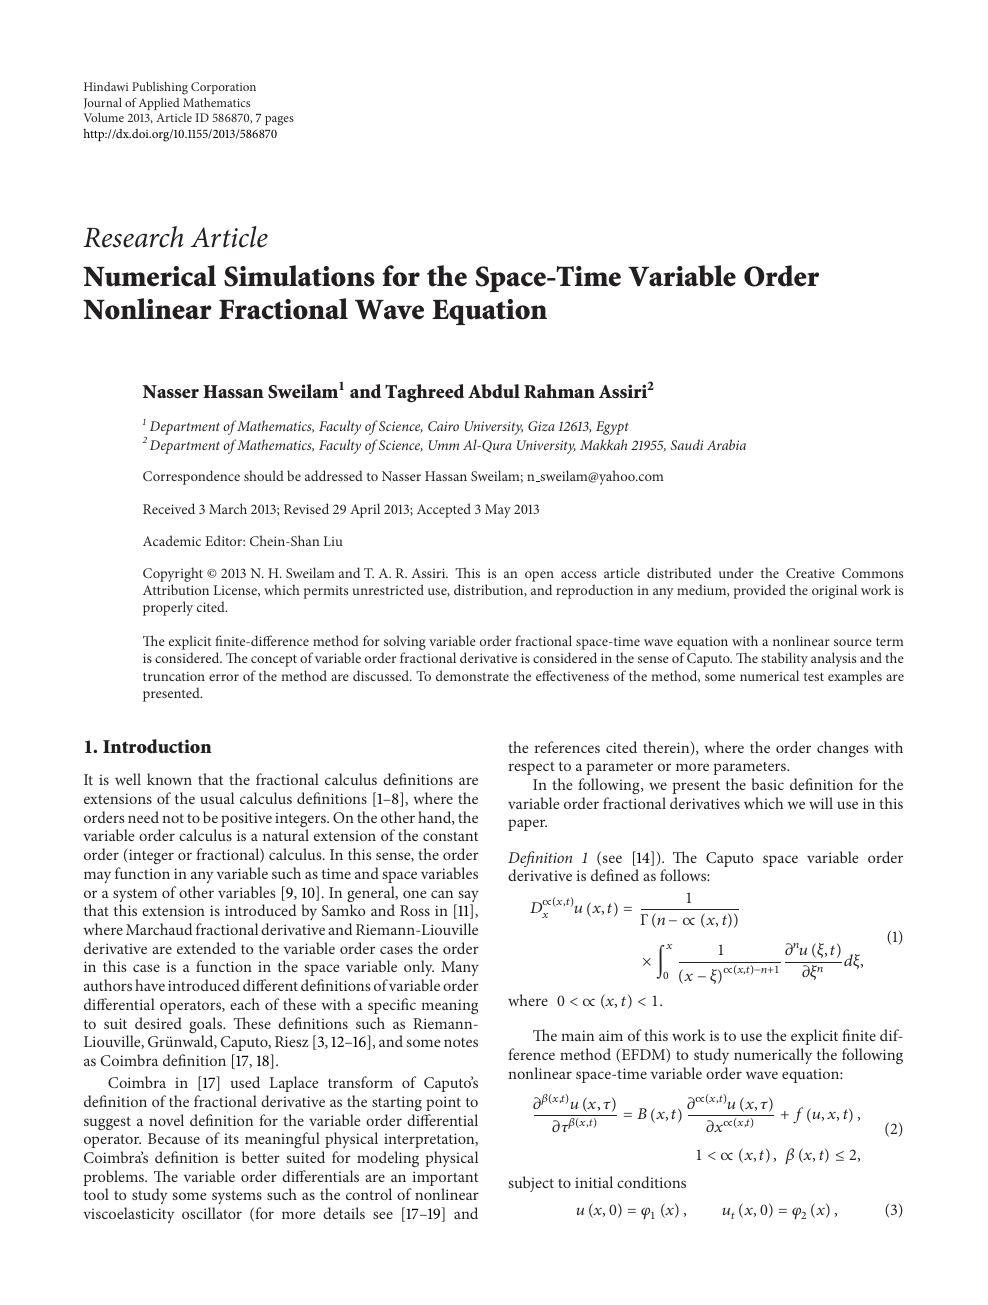 Numerical Simulations For The Space Time Variable Order Nonlinear Fractional Wave Equation Topic Of Research Paper In Mathematics Download Scholarly Article Pdf And Read For Free On Cyberleninka Open Science Hub